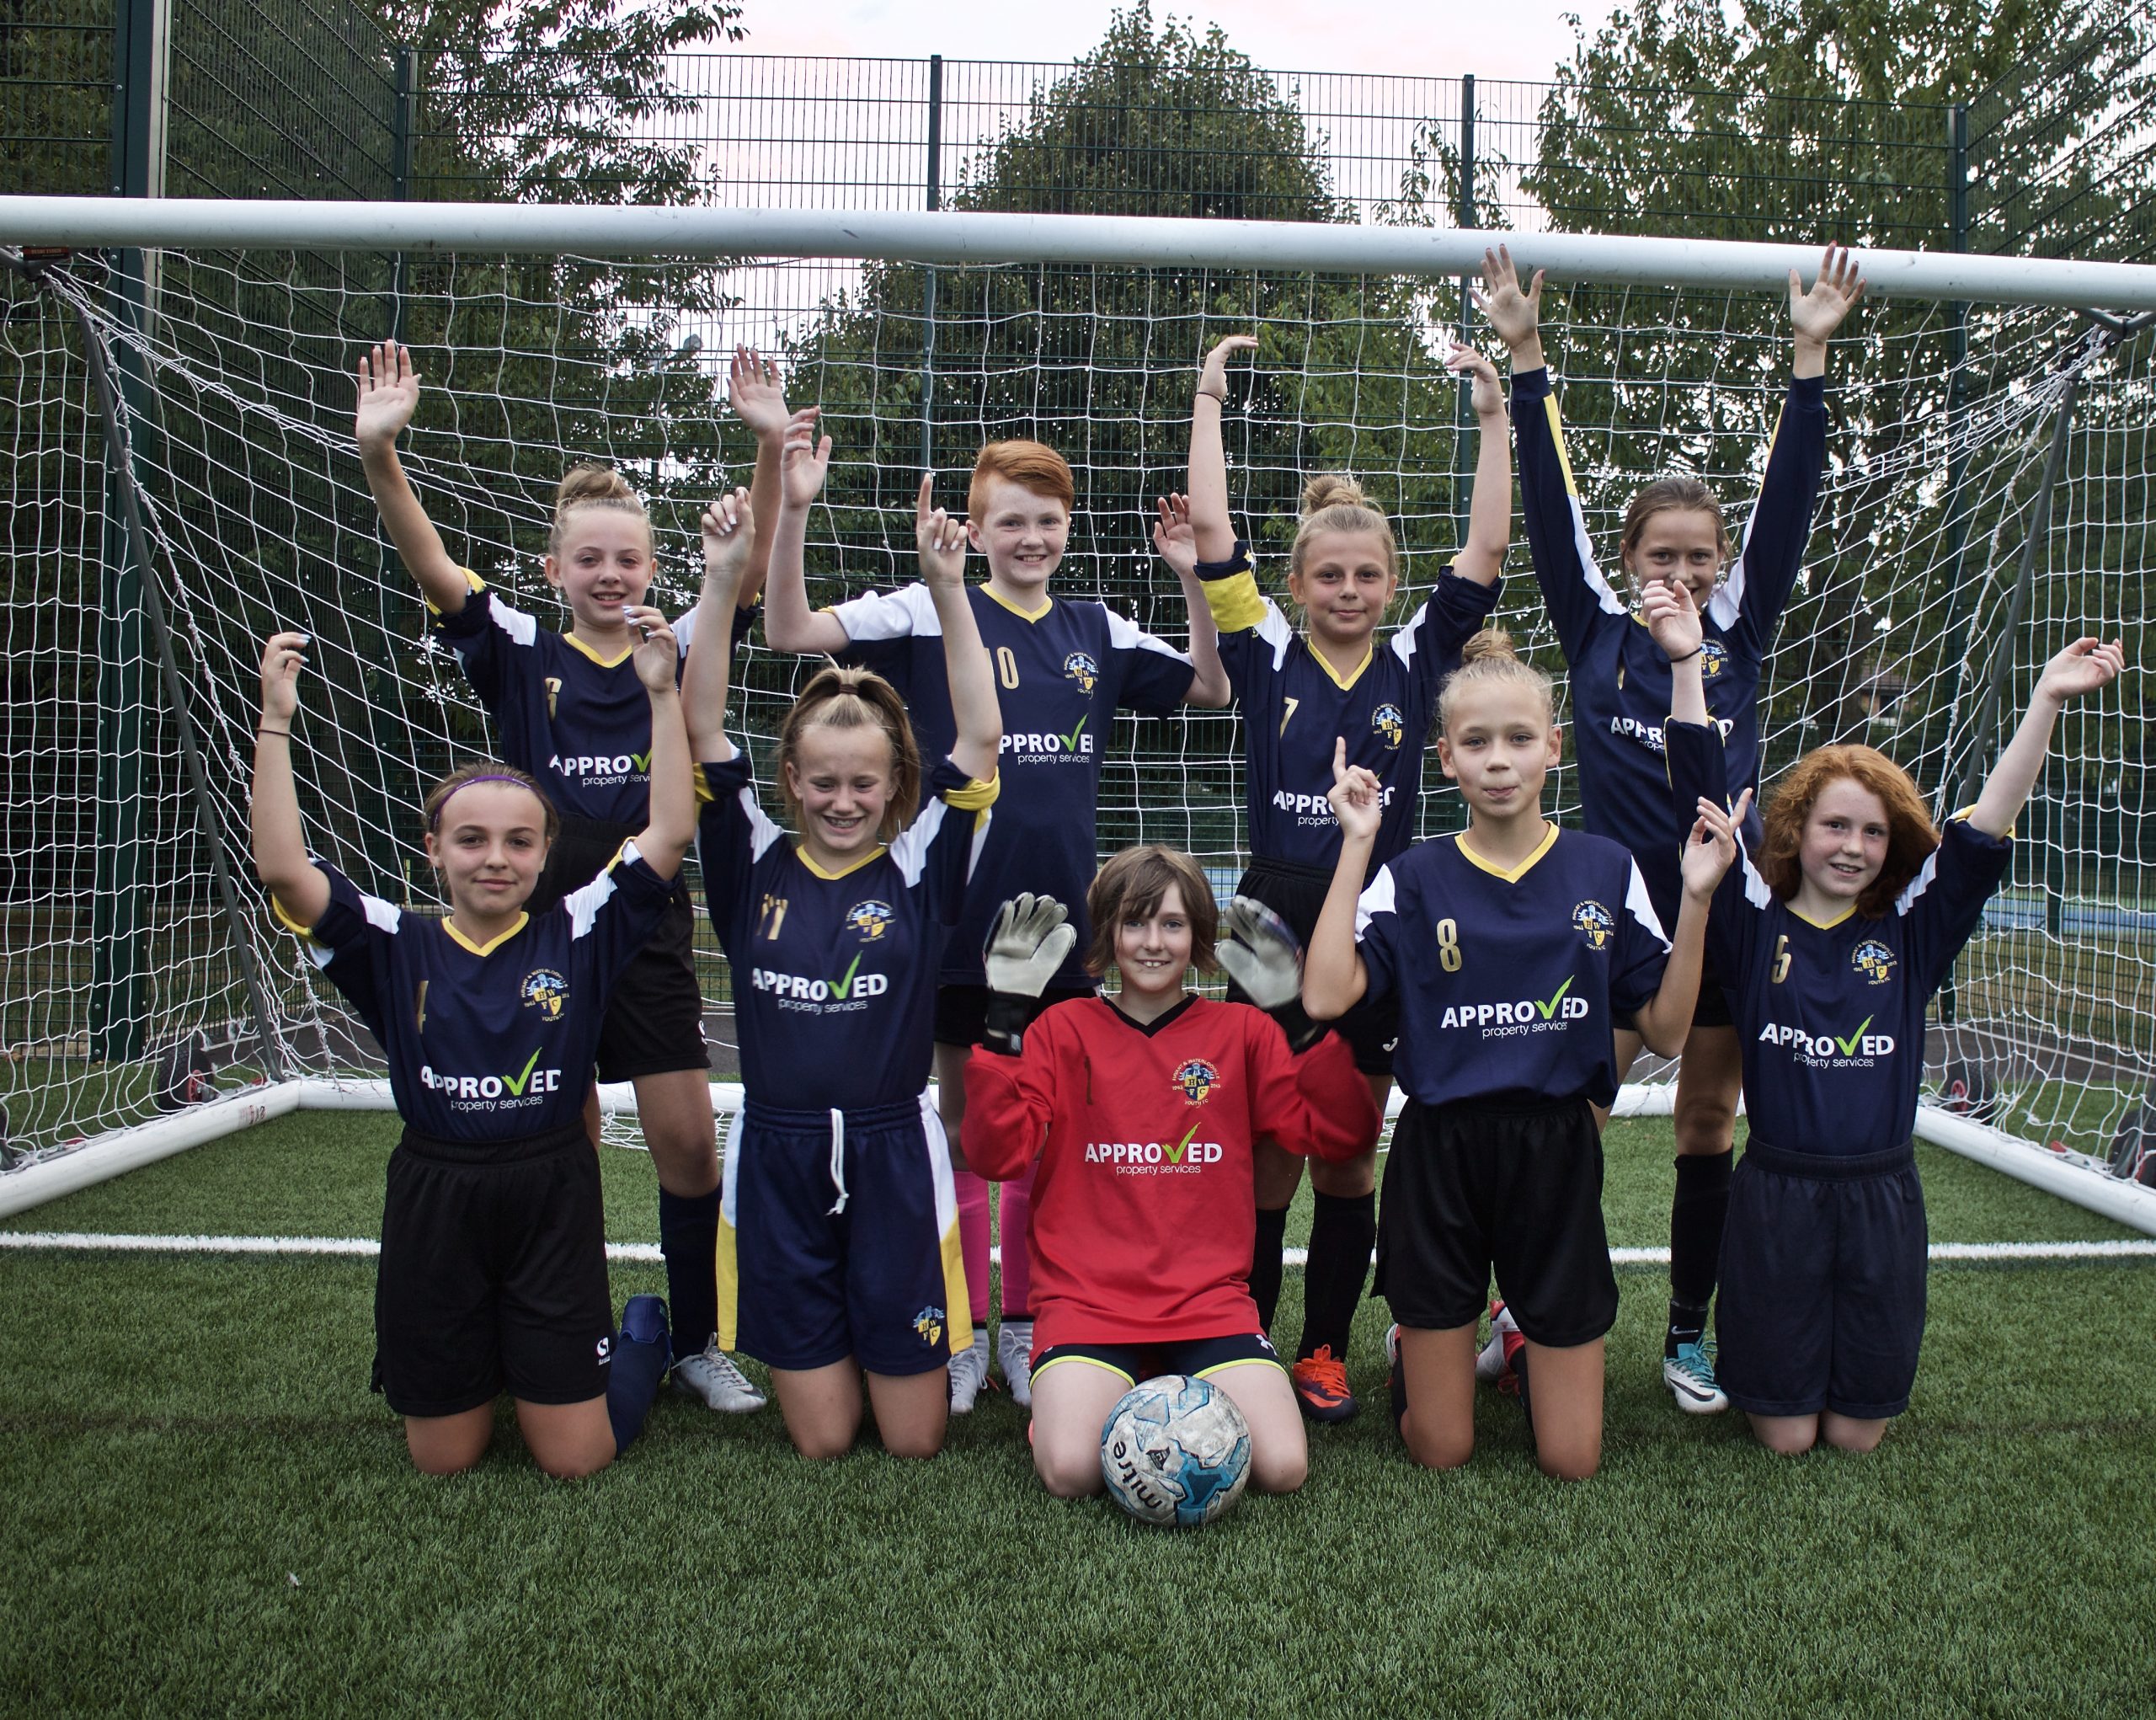 Havant & Waterlooville Girls U13s team photo after their very first friendly against Romsey Town